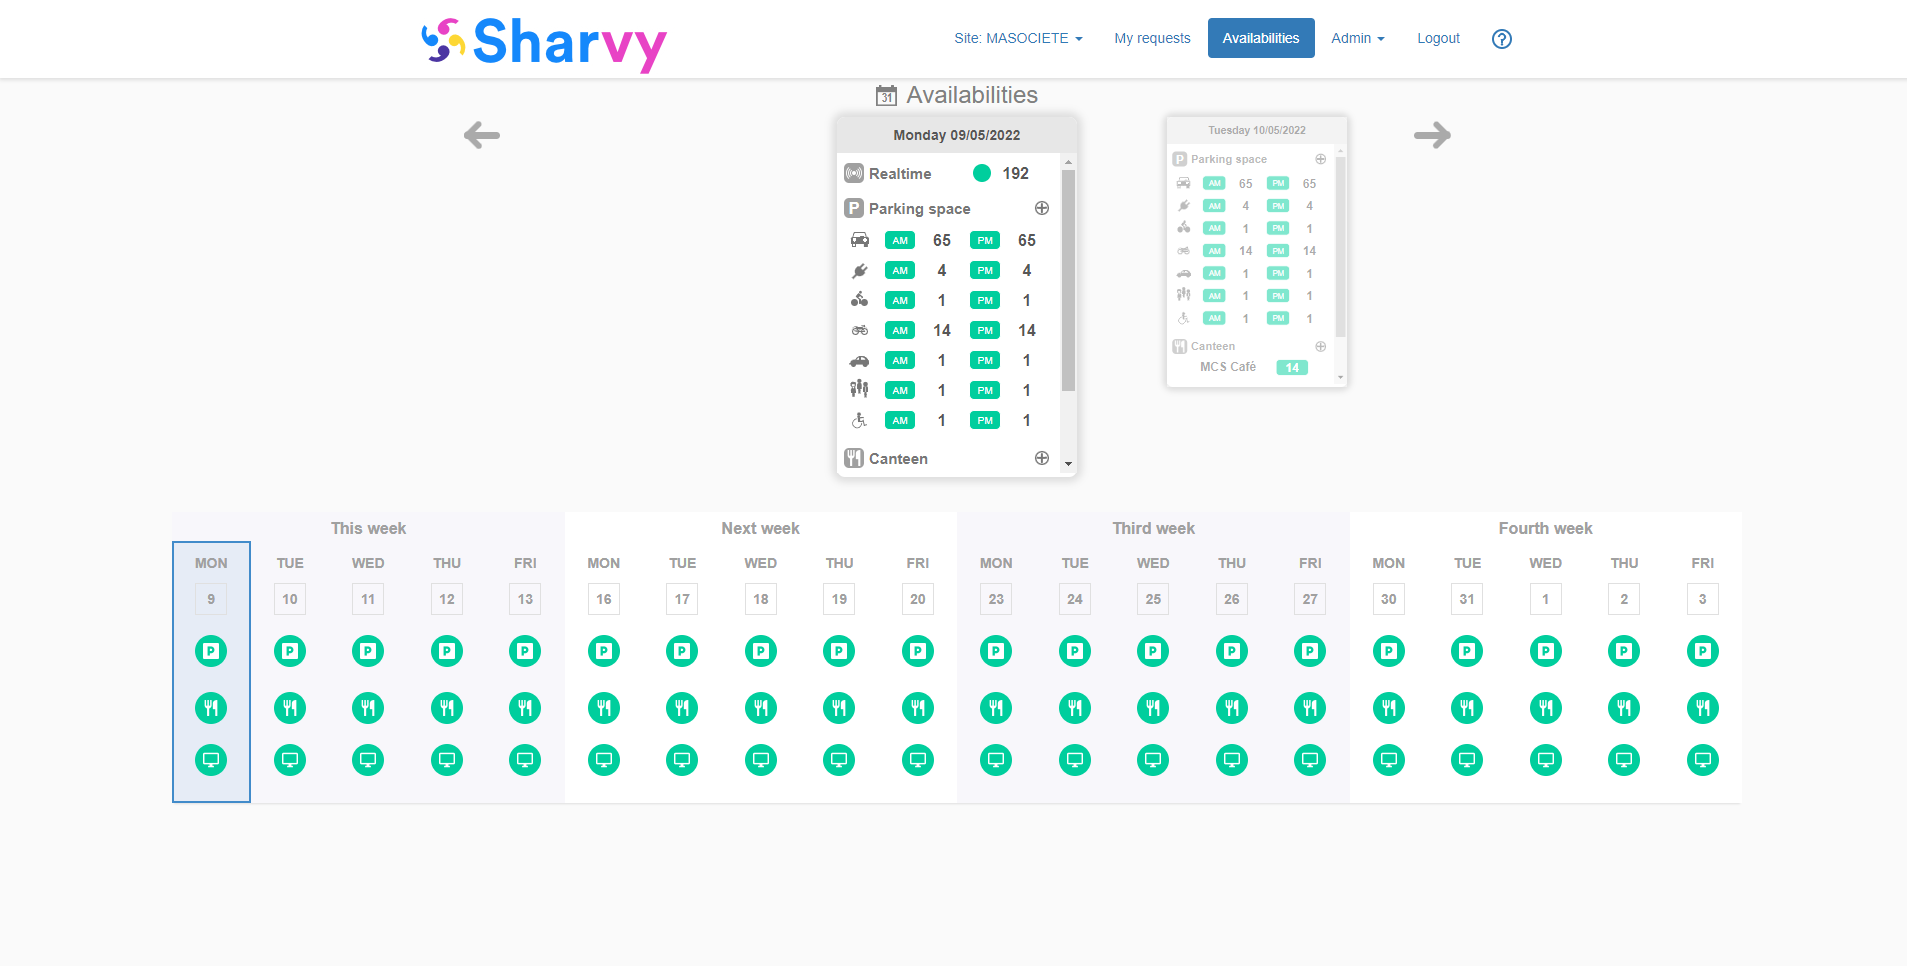 Sharvy - Availabilities tab - Details of available spaces on a given day